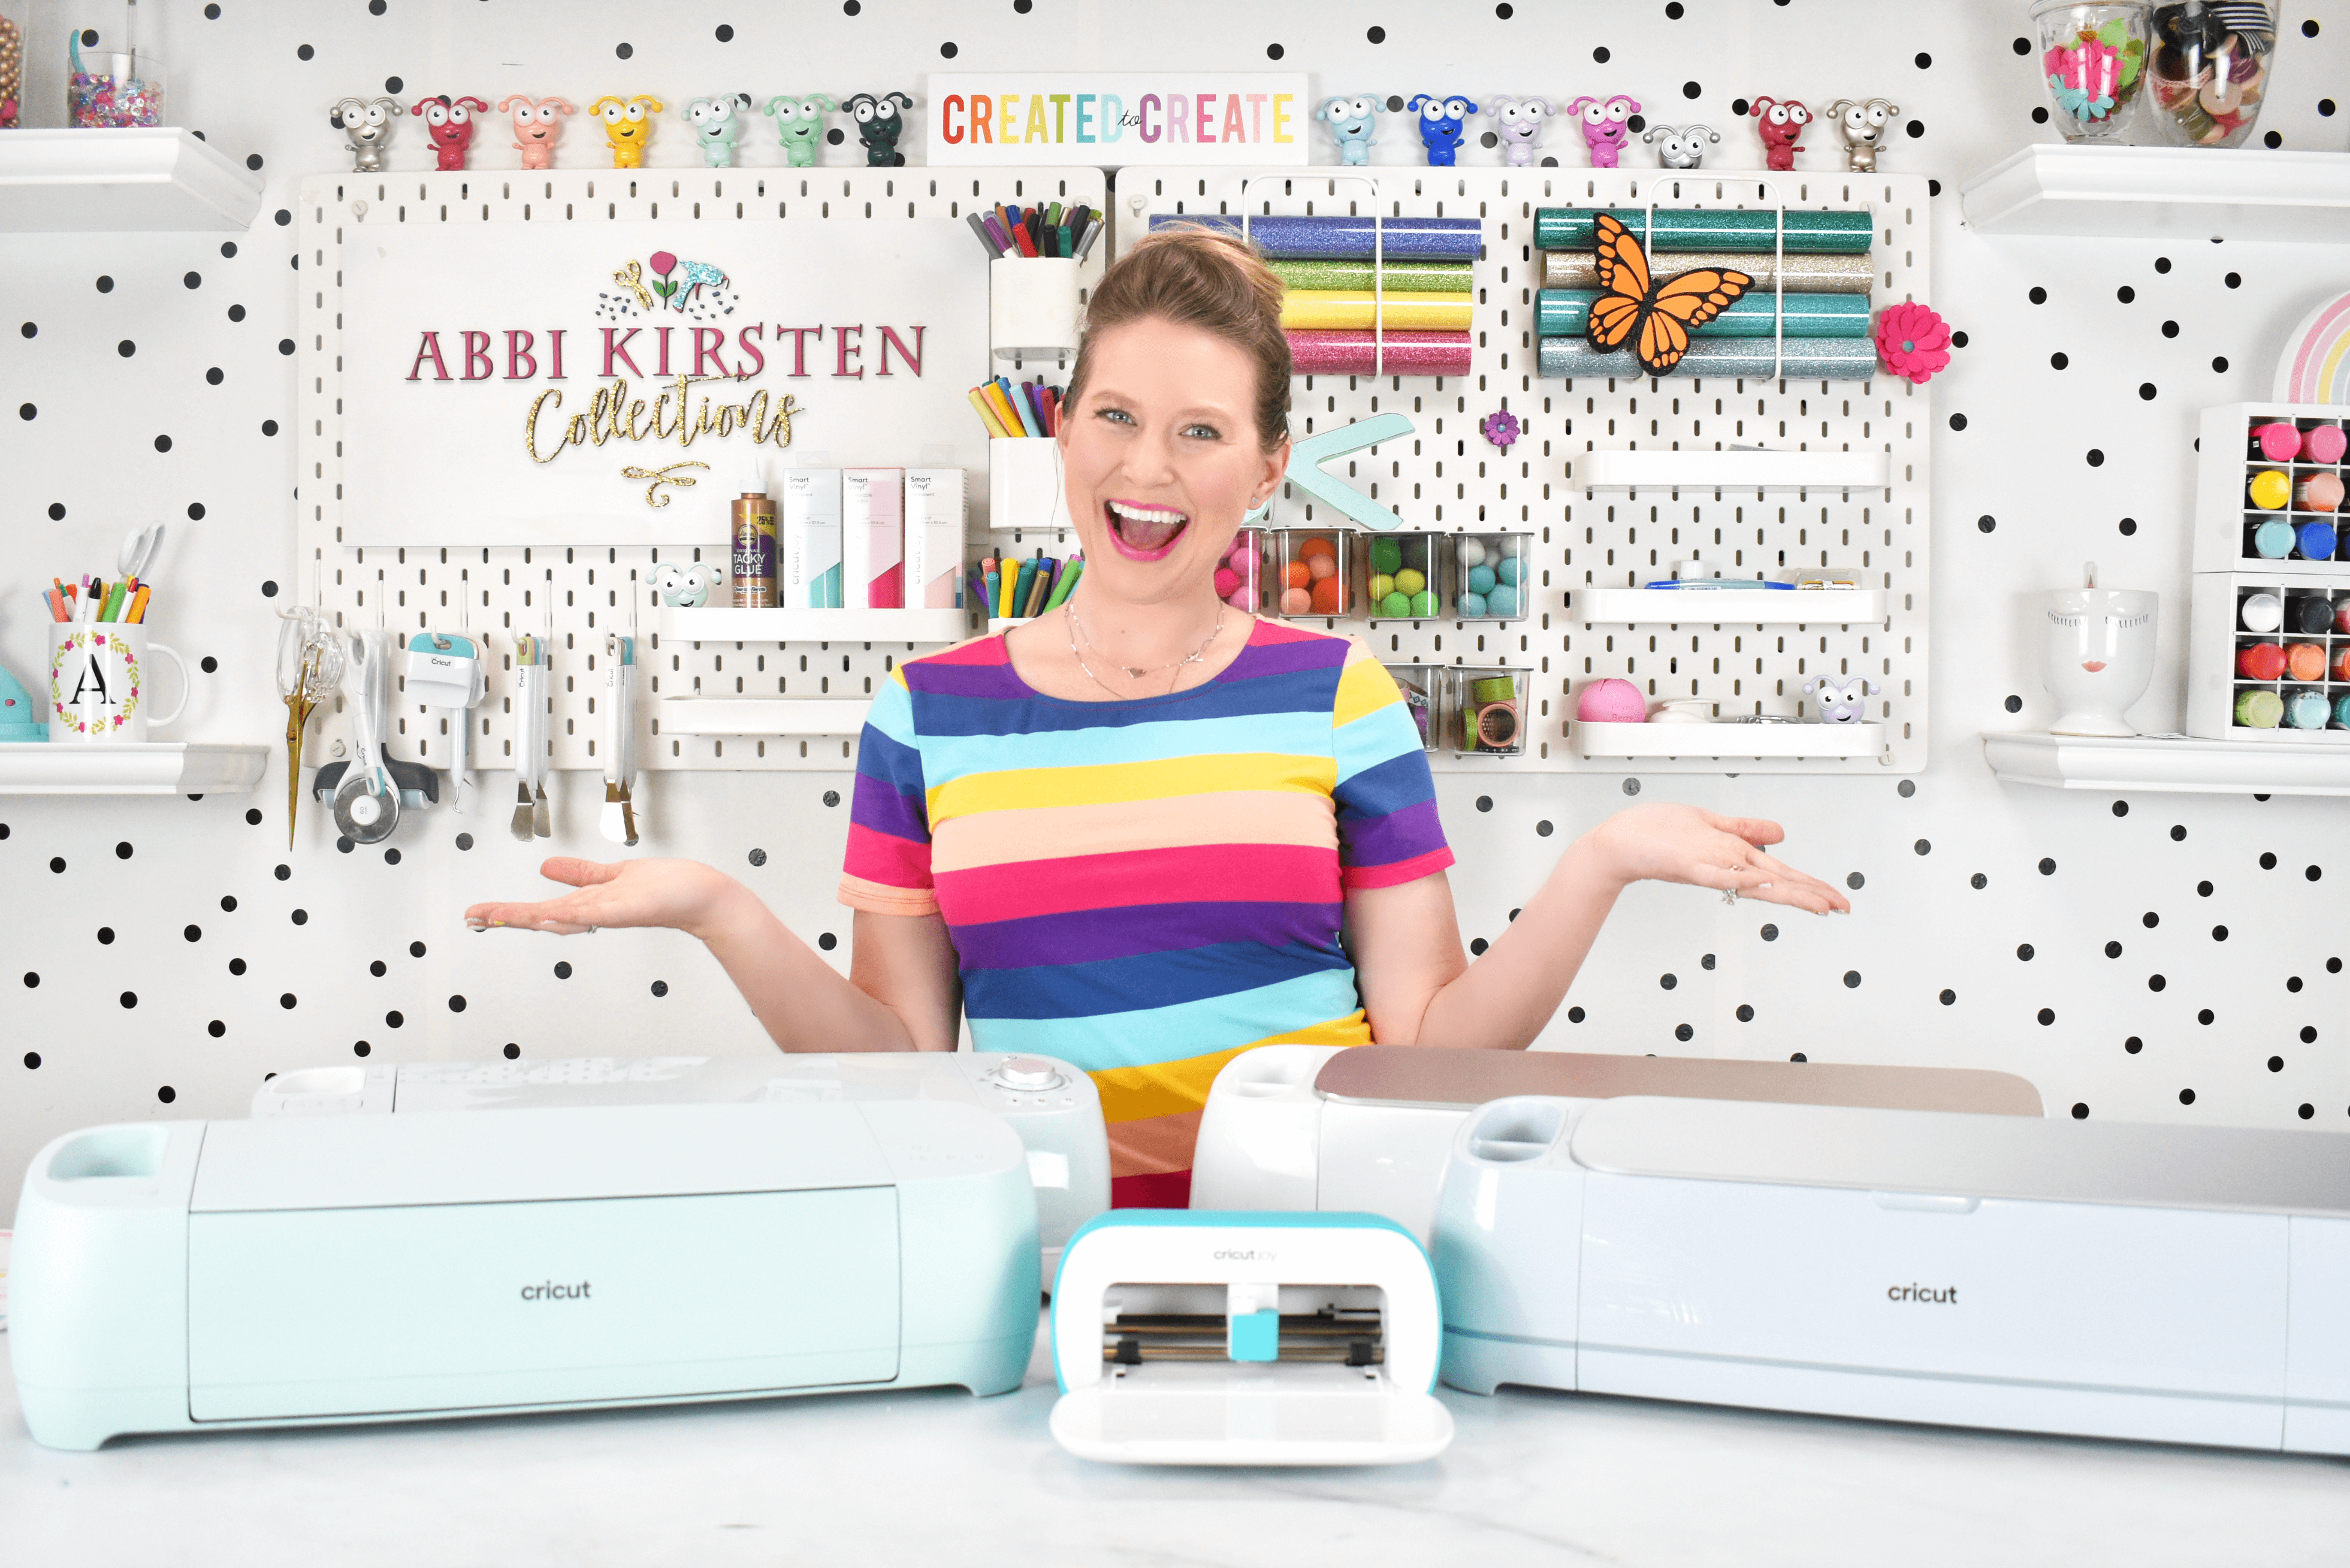 Cricut Joy Materials and Accessories That You'll Need Story - Abbi Kirsten  Collections